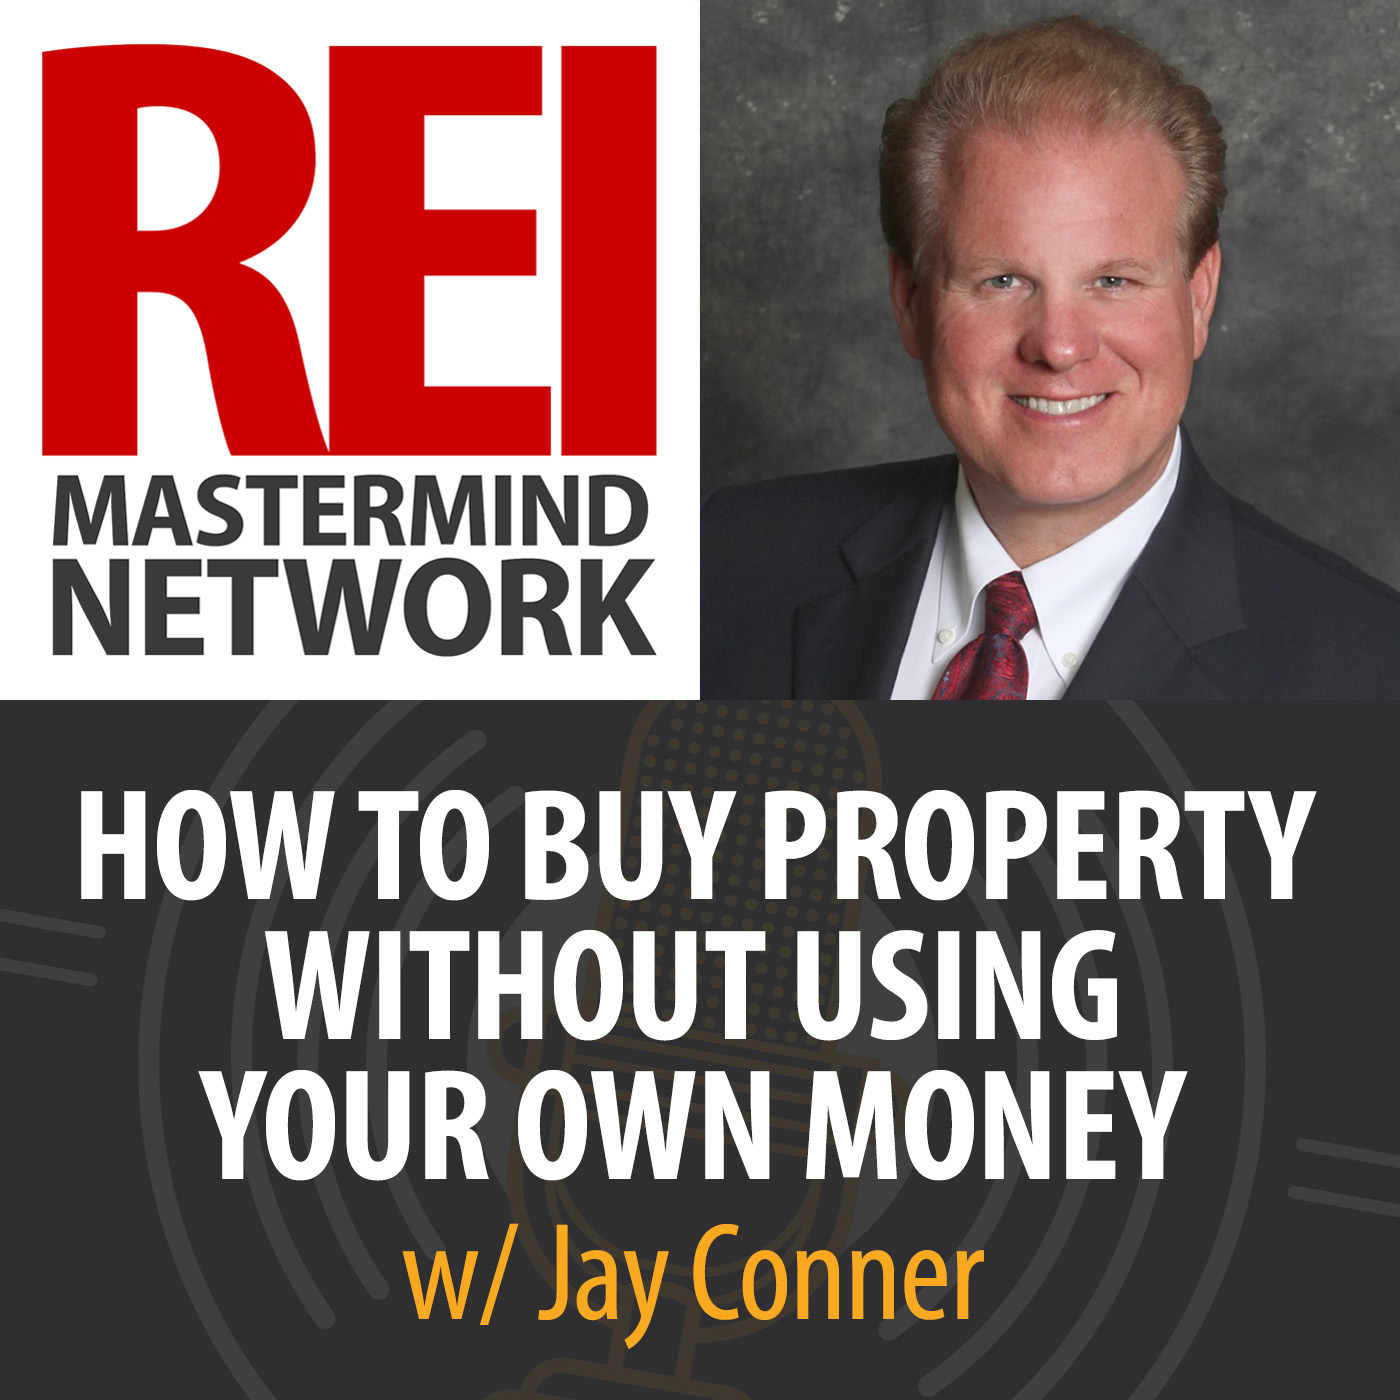 How to Buy Property Without Using Your Own Money with Jay Conner